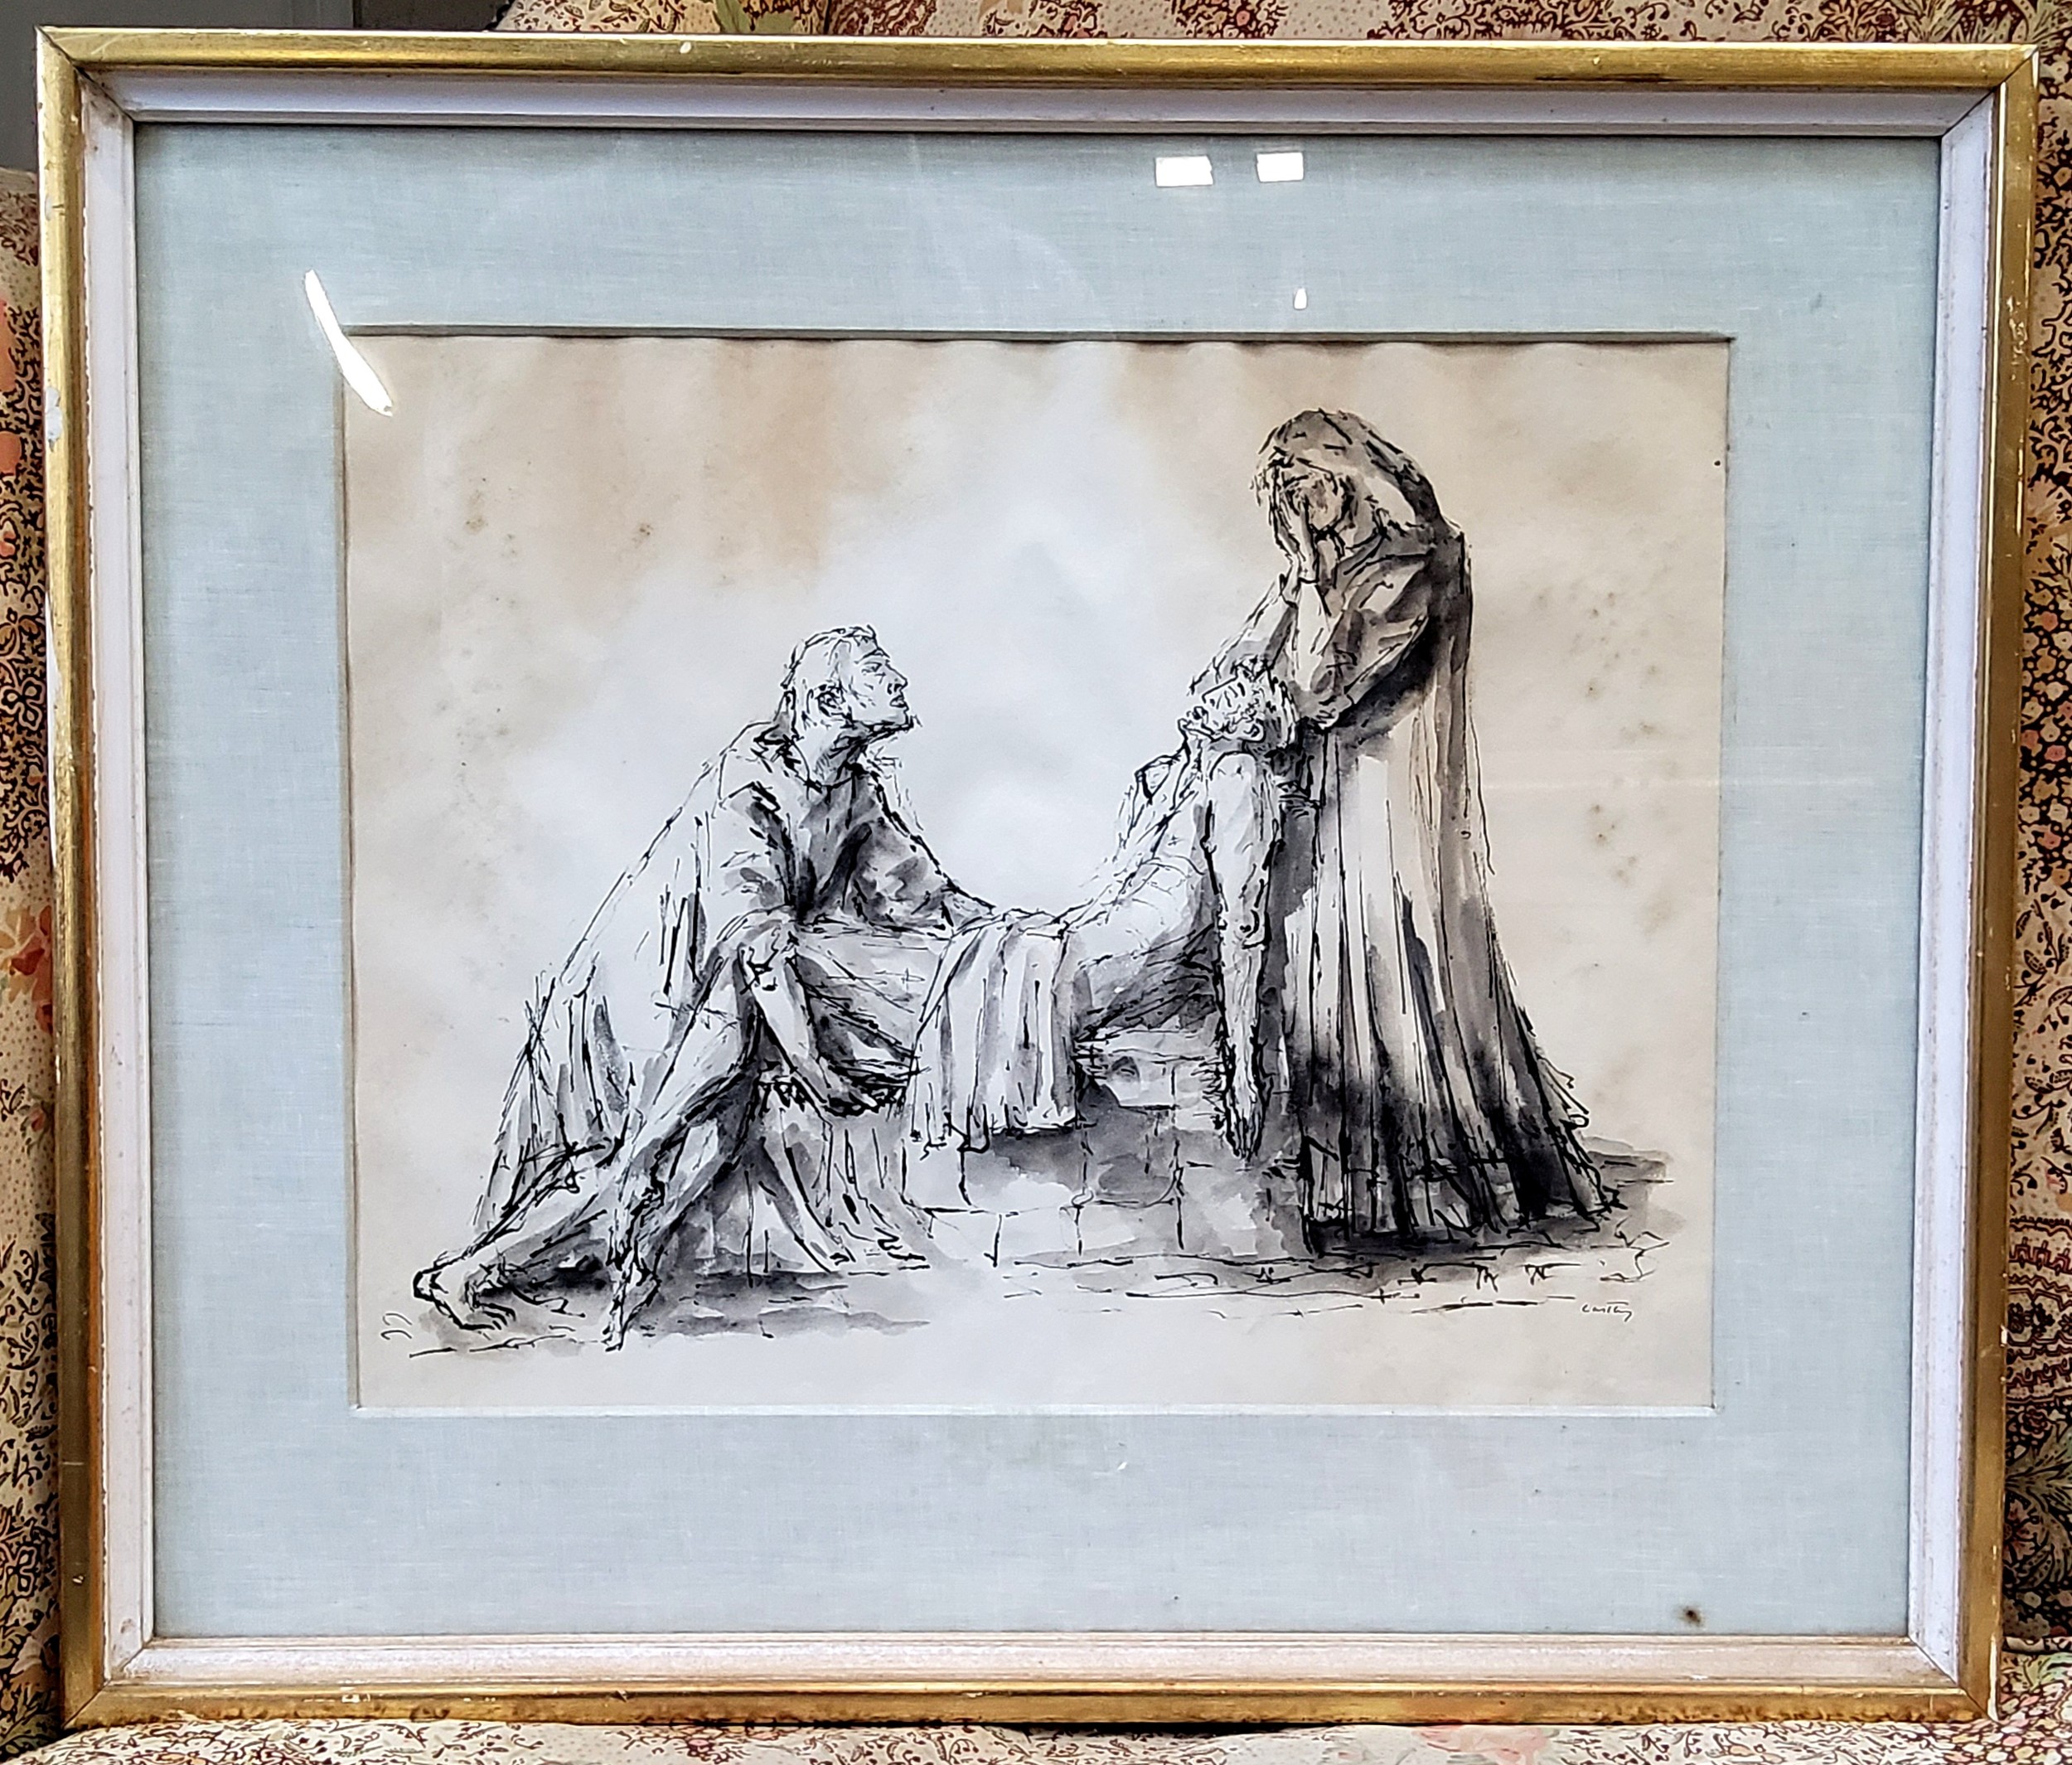 Italian School, In the Old Master Style, Death of Christ, indistinctly signed, pen, ink and